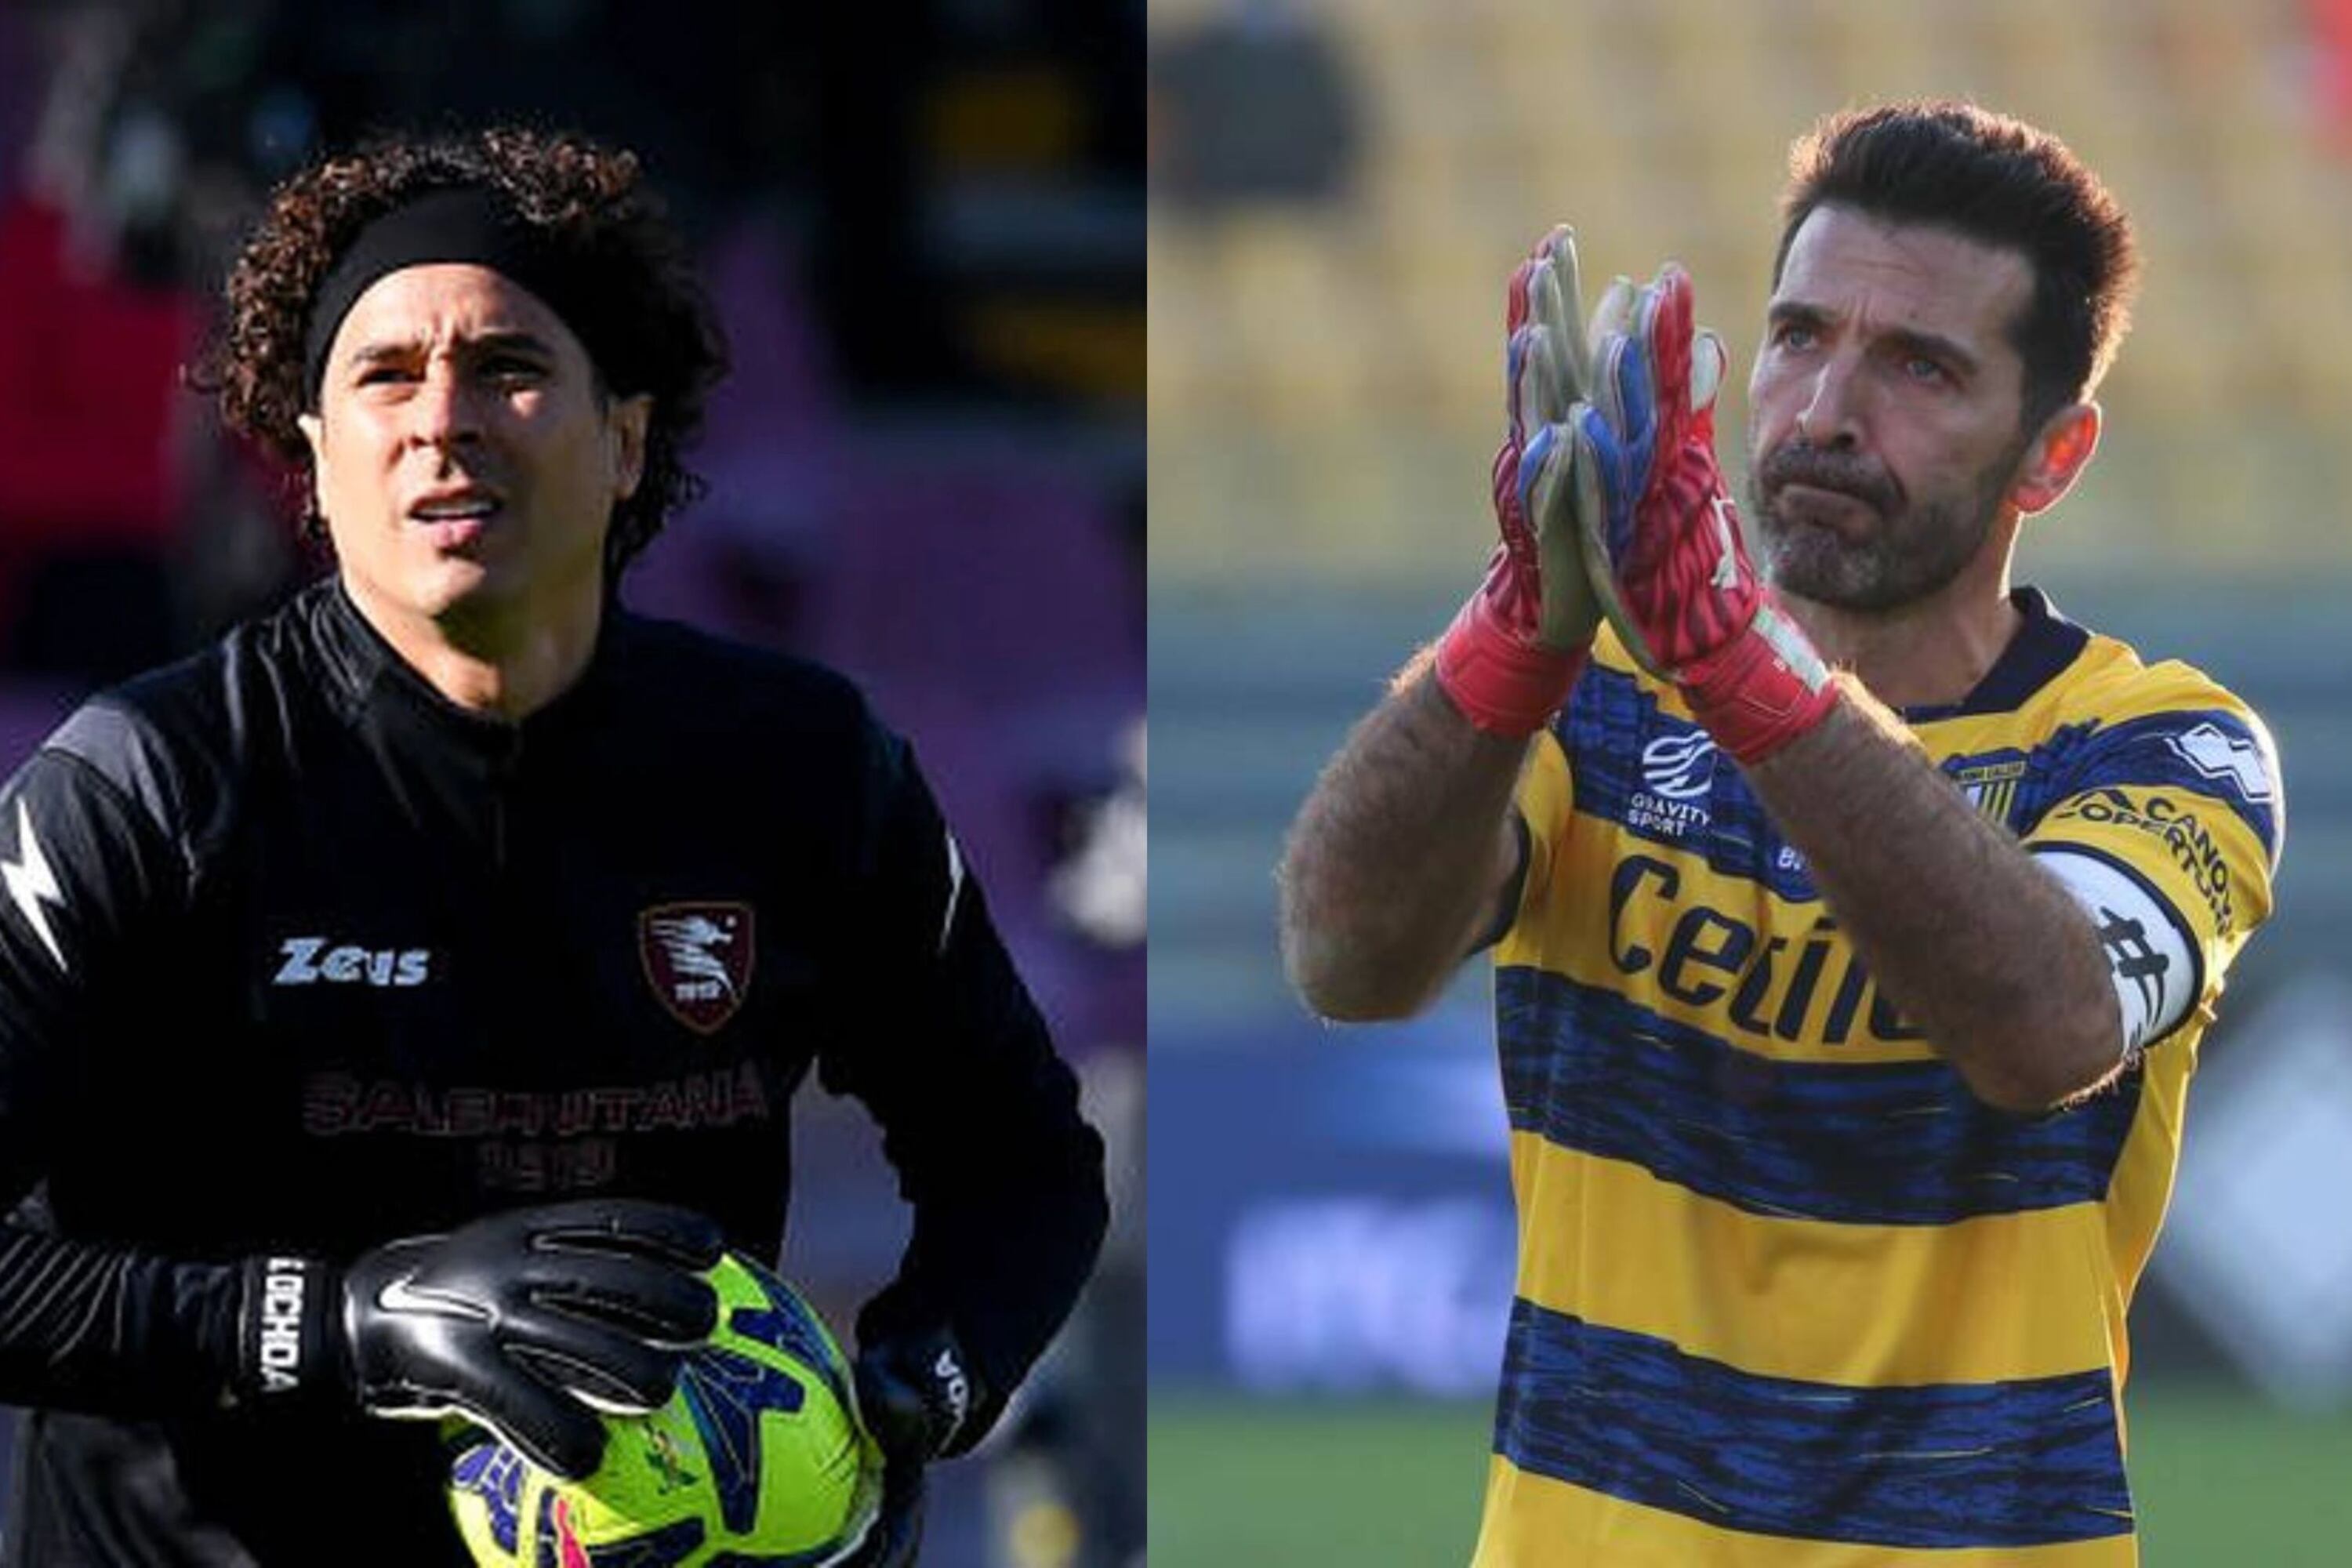 While Ochoa claims to be Buffon fan, the Mexican goalkeeper that the Italian admires